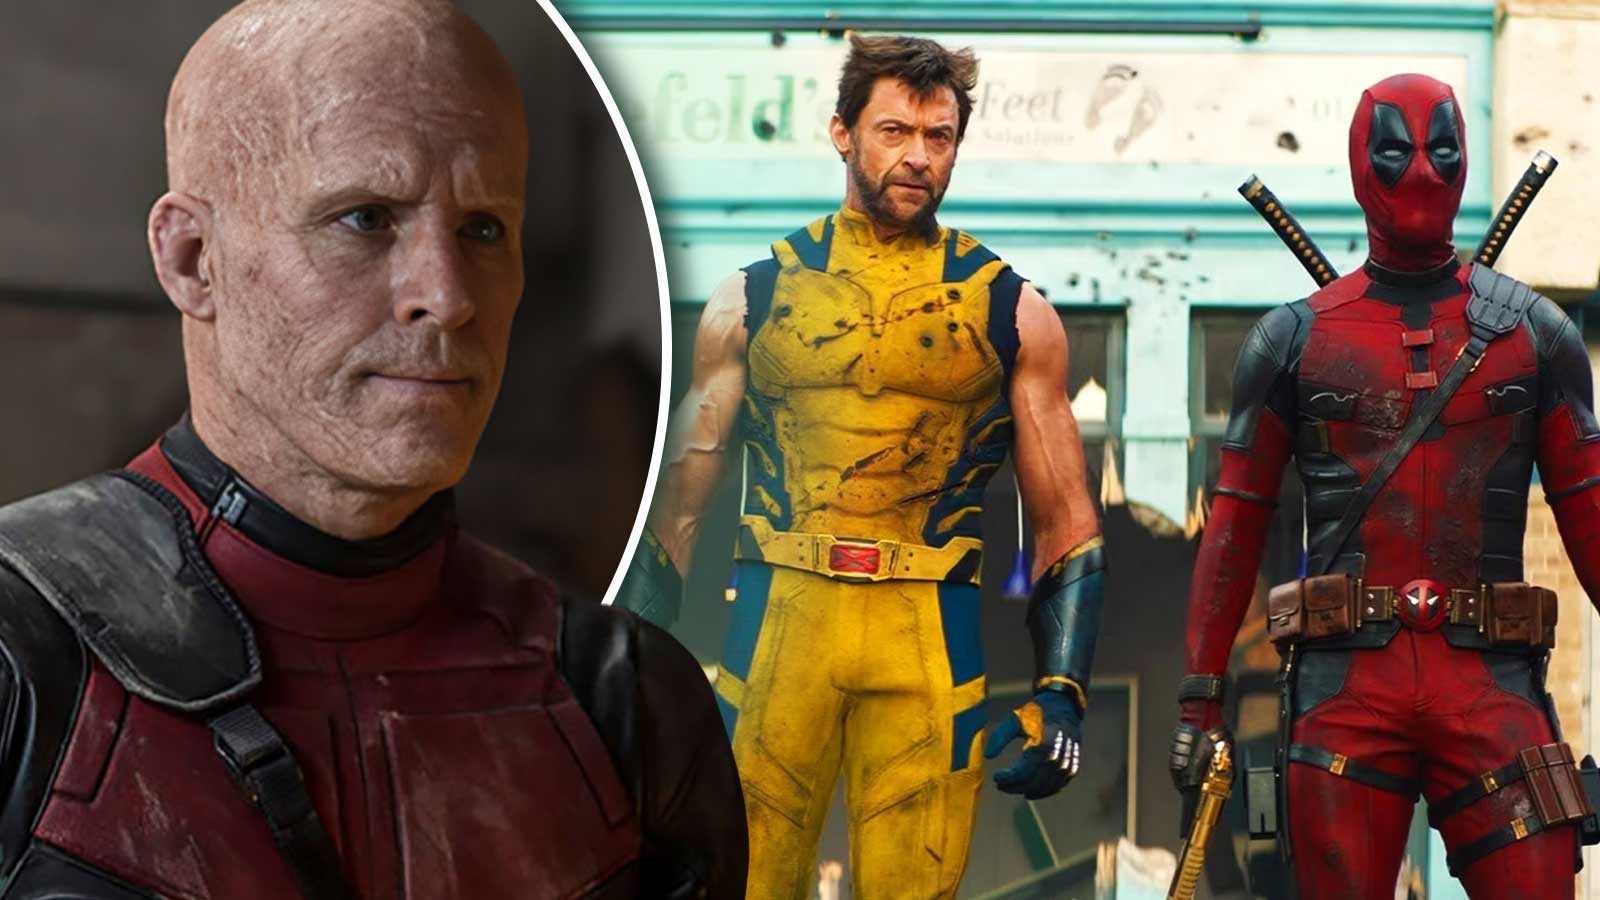 “Best movie I’ve ever done”: Ryan Reynolds’ Tall Claims About Deadpool & Wolverine Prove It Could Finally Secure His Future in the MCU With a Multi-starrer Gig